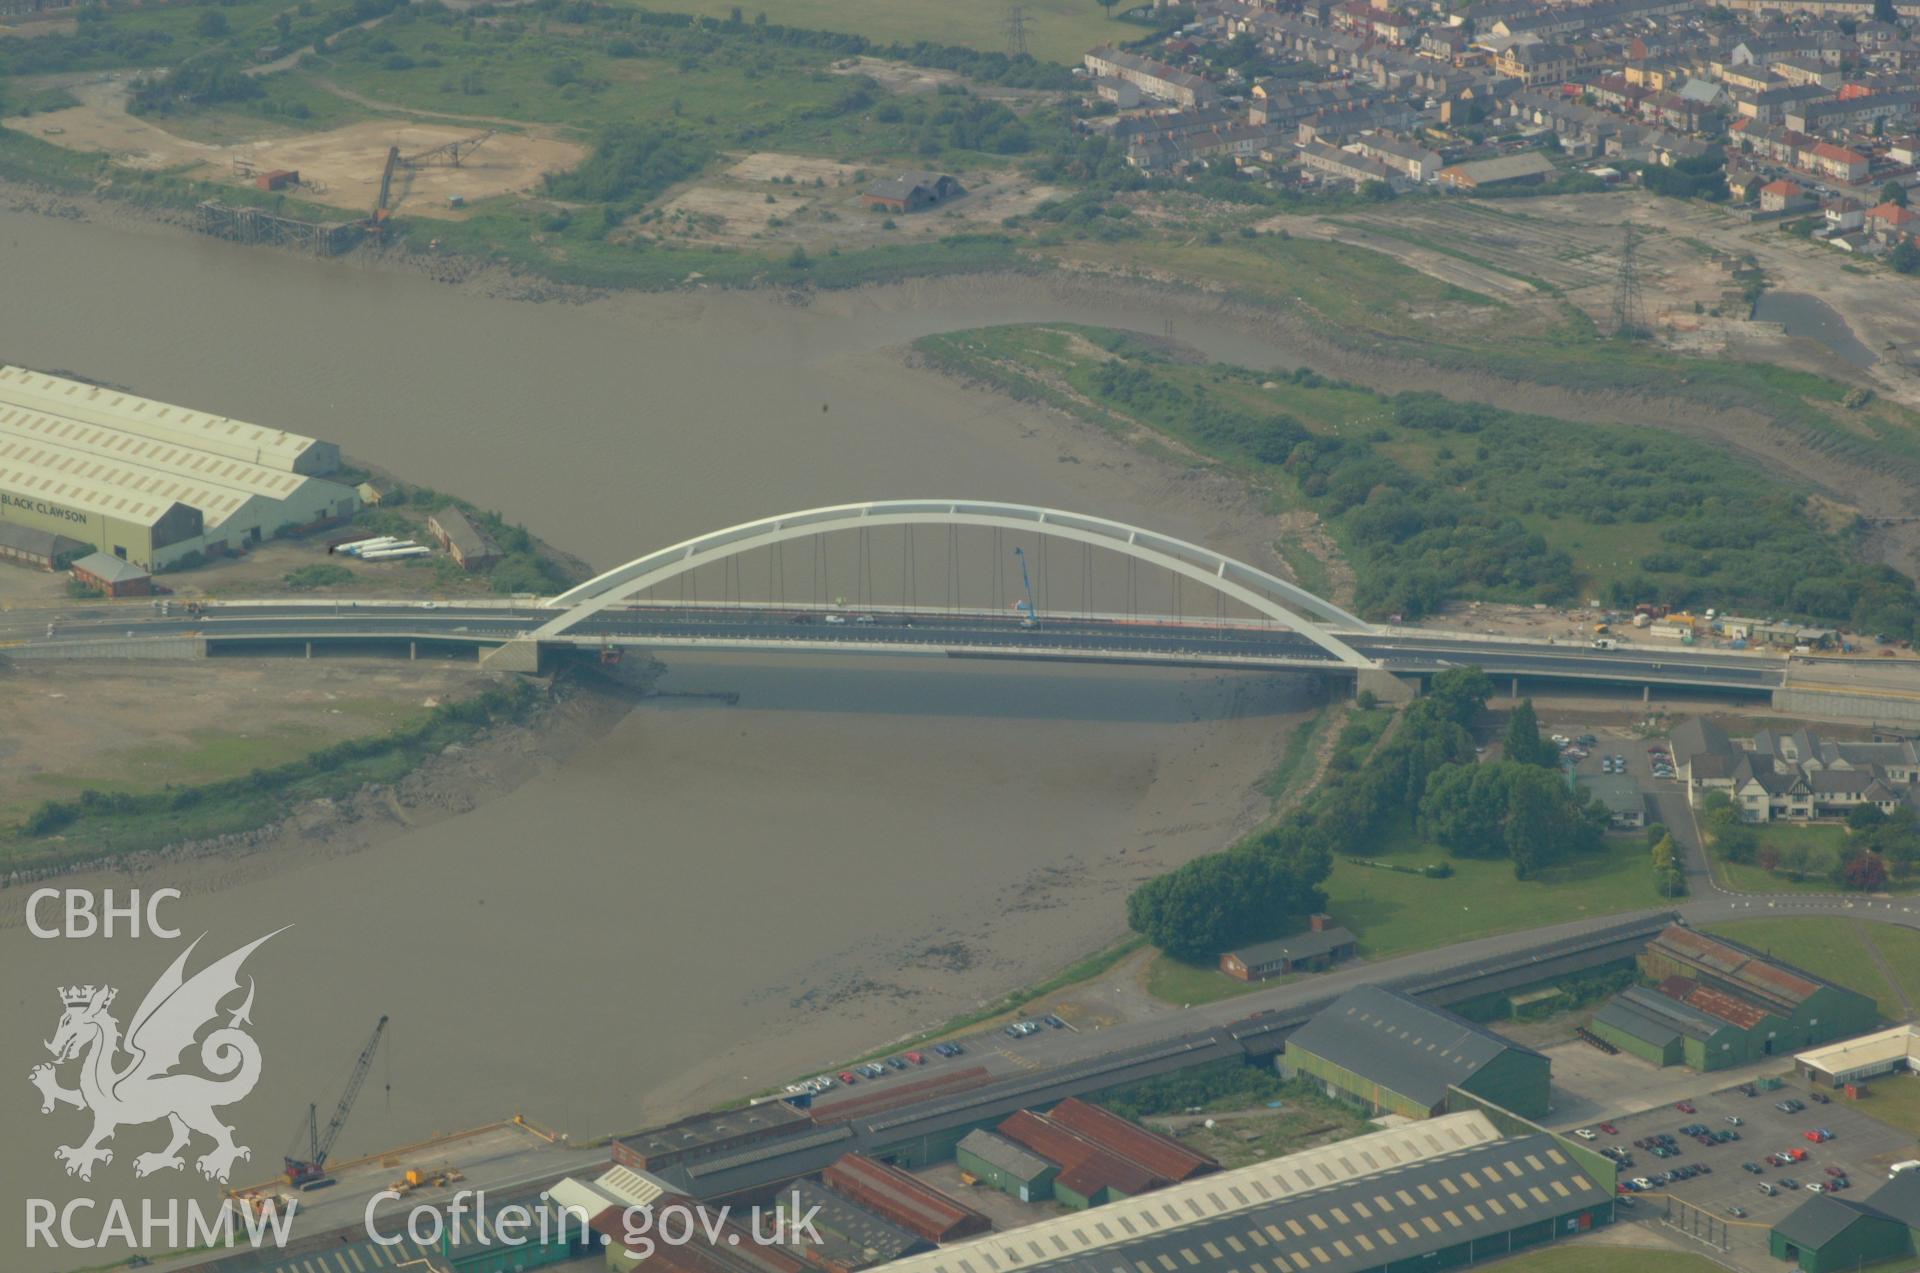 RCAHMW colour oblique aerial photograph of Newport Docks, New Bridge. Taken on 26 May 2004 by Toby Driver